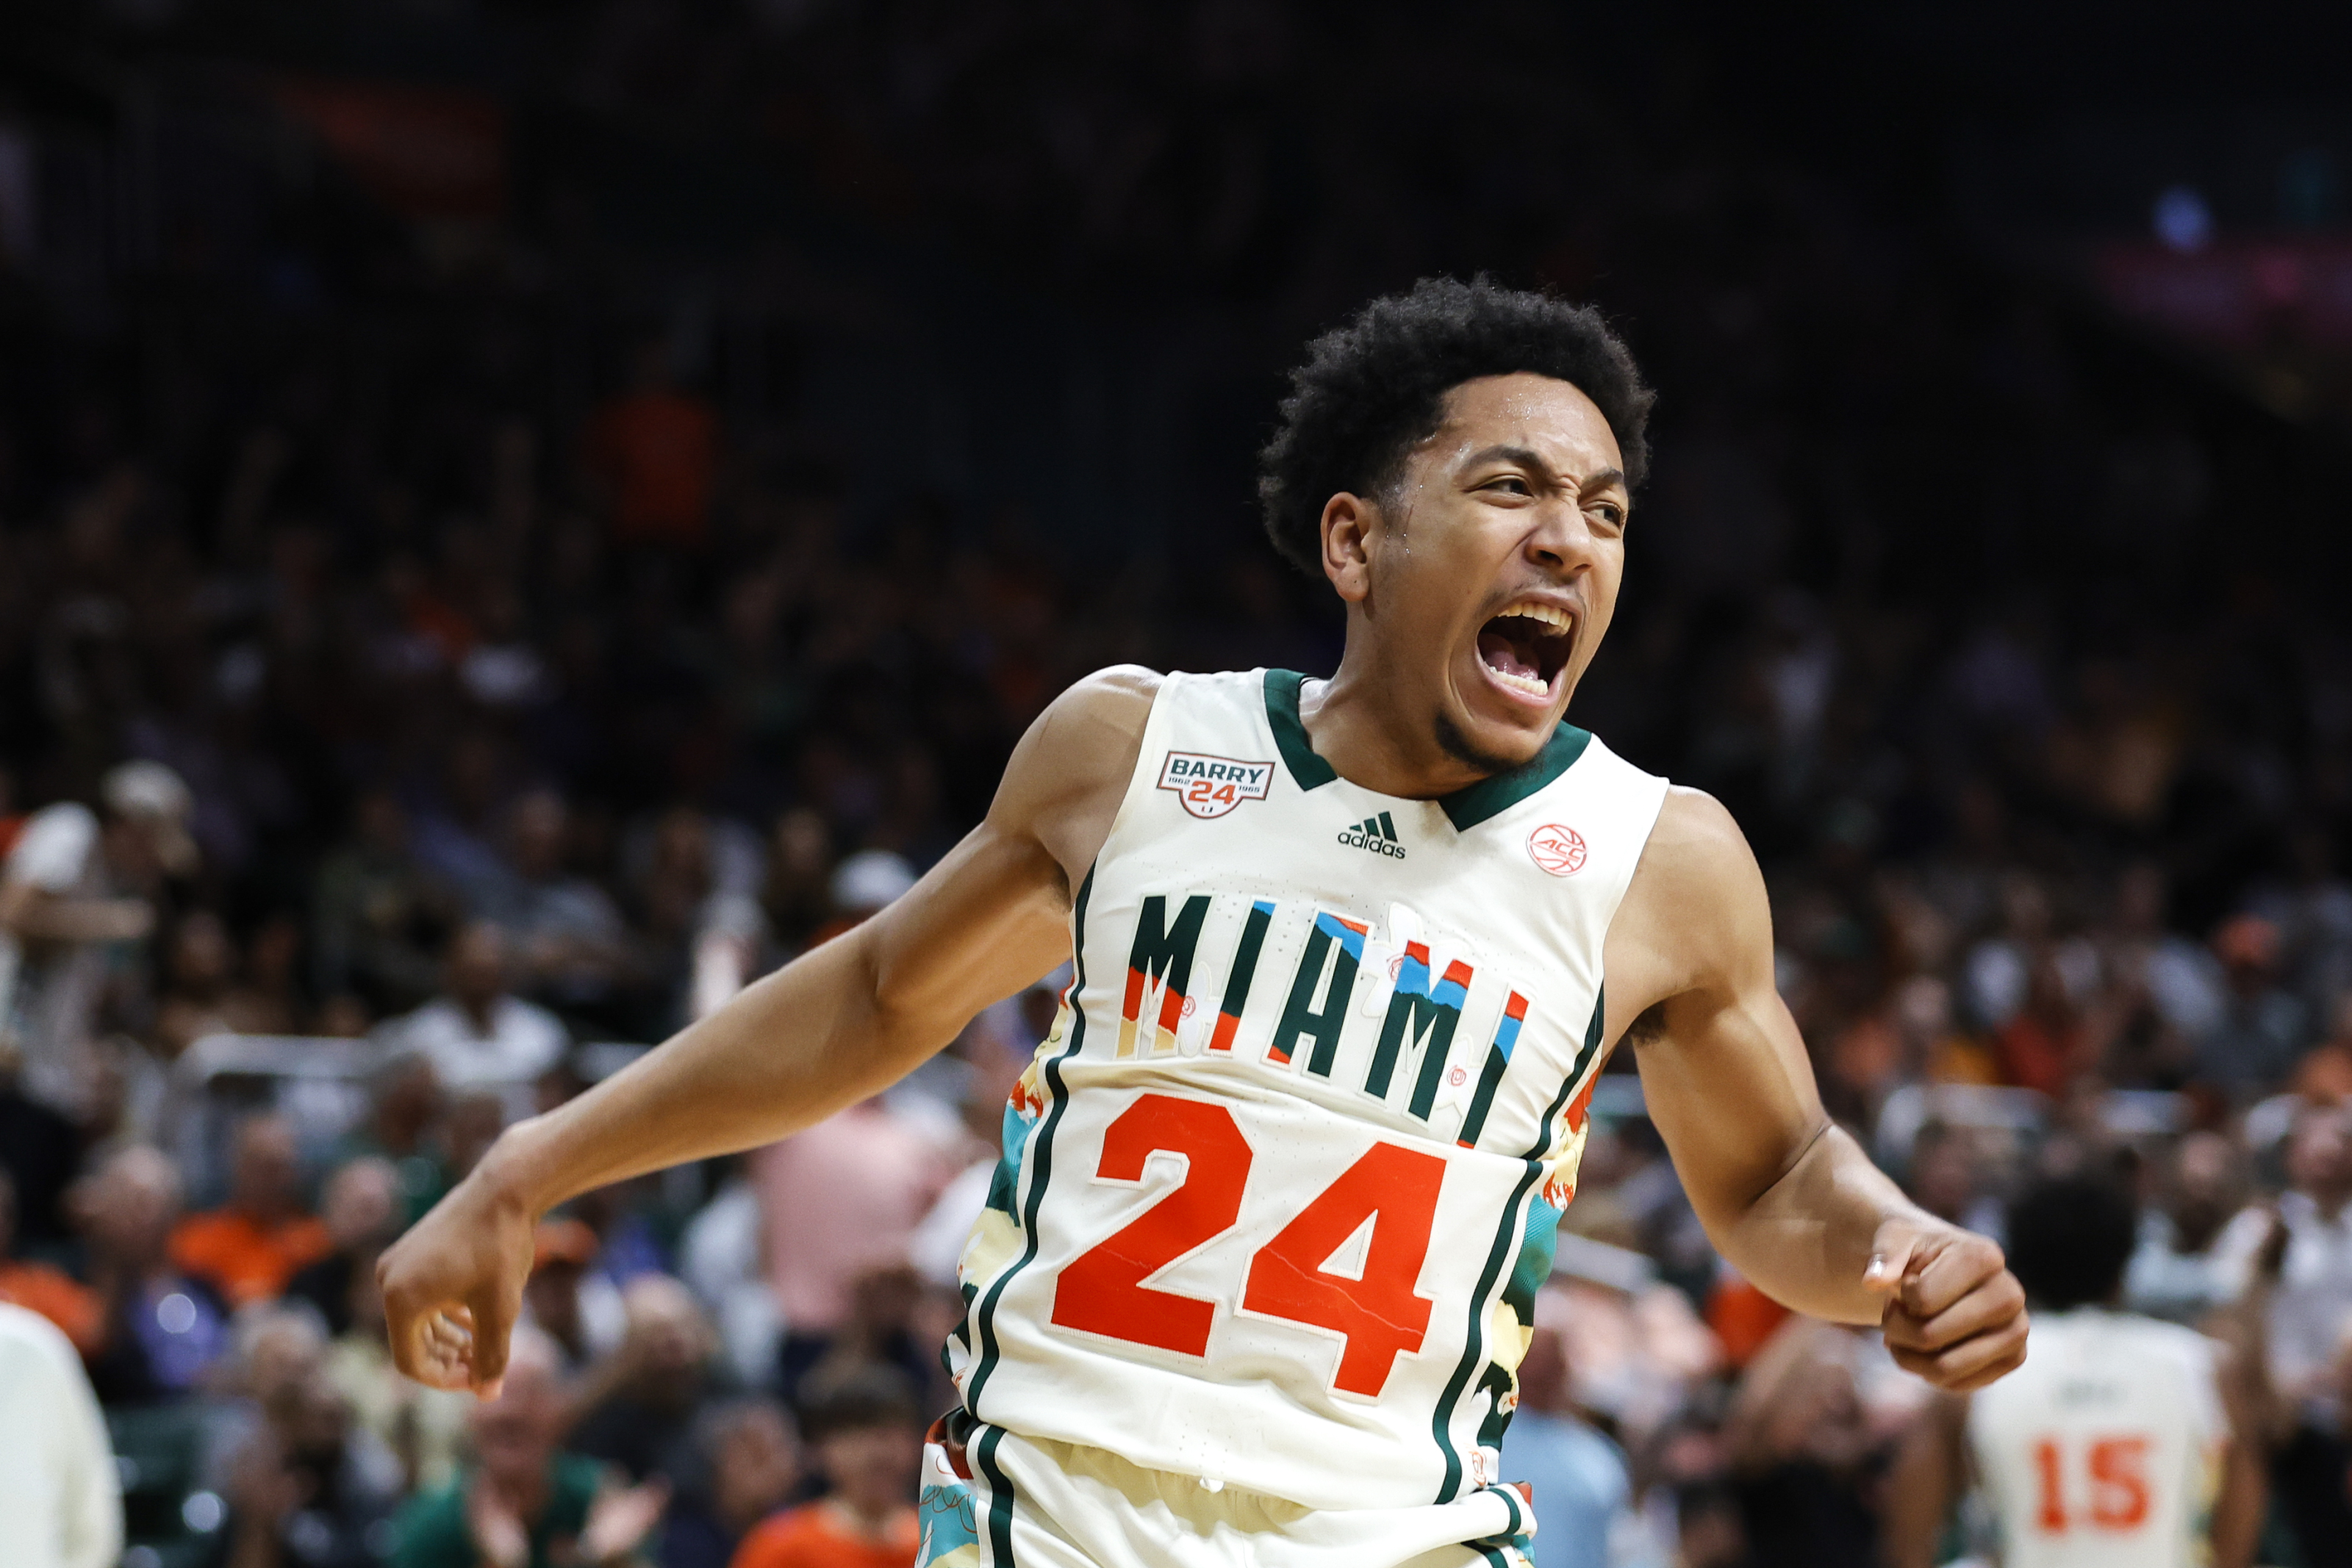 How did Miami Hurricanes get to the Final Four?